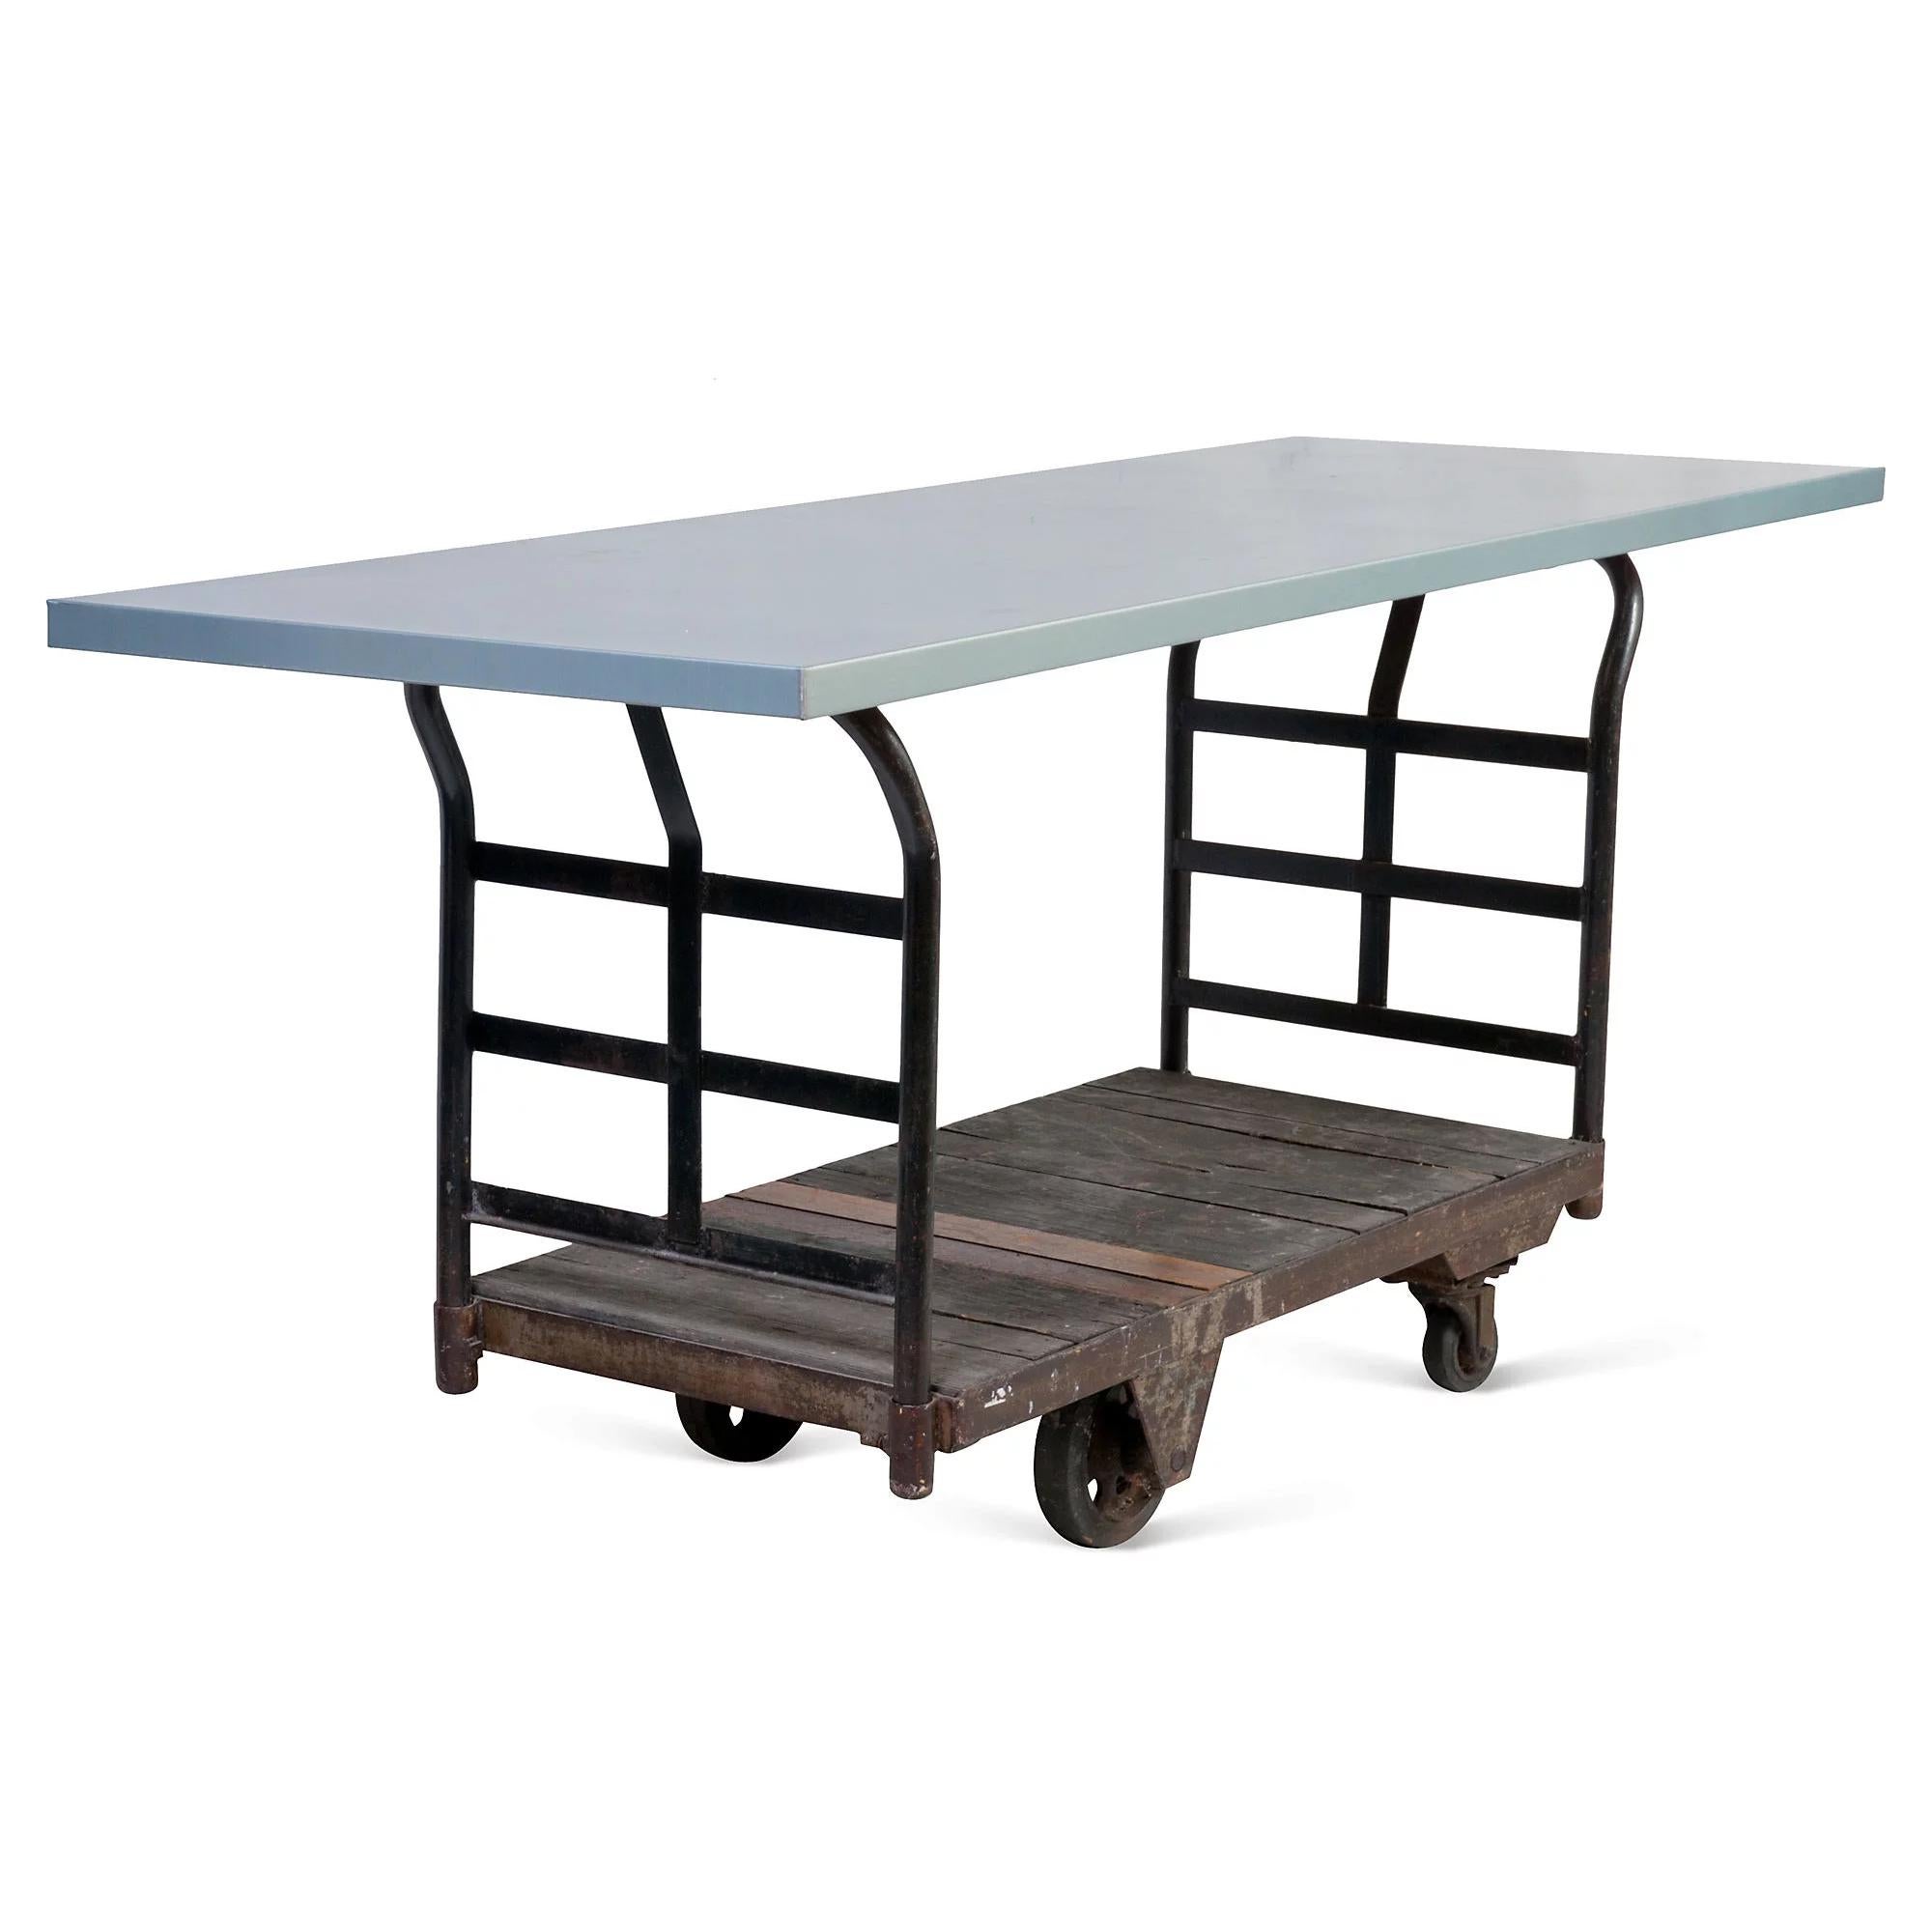 Experience the perfect blend of rustic and modern design with our exquisite wood and metal industrial cargo cart on caster wheels! Its rugged yet sophisticated style will add an edge to any space. Use it to showcase your favorite art pieces or